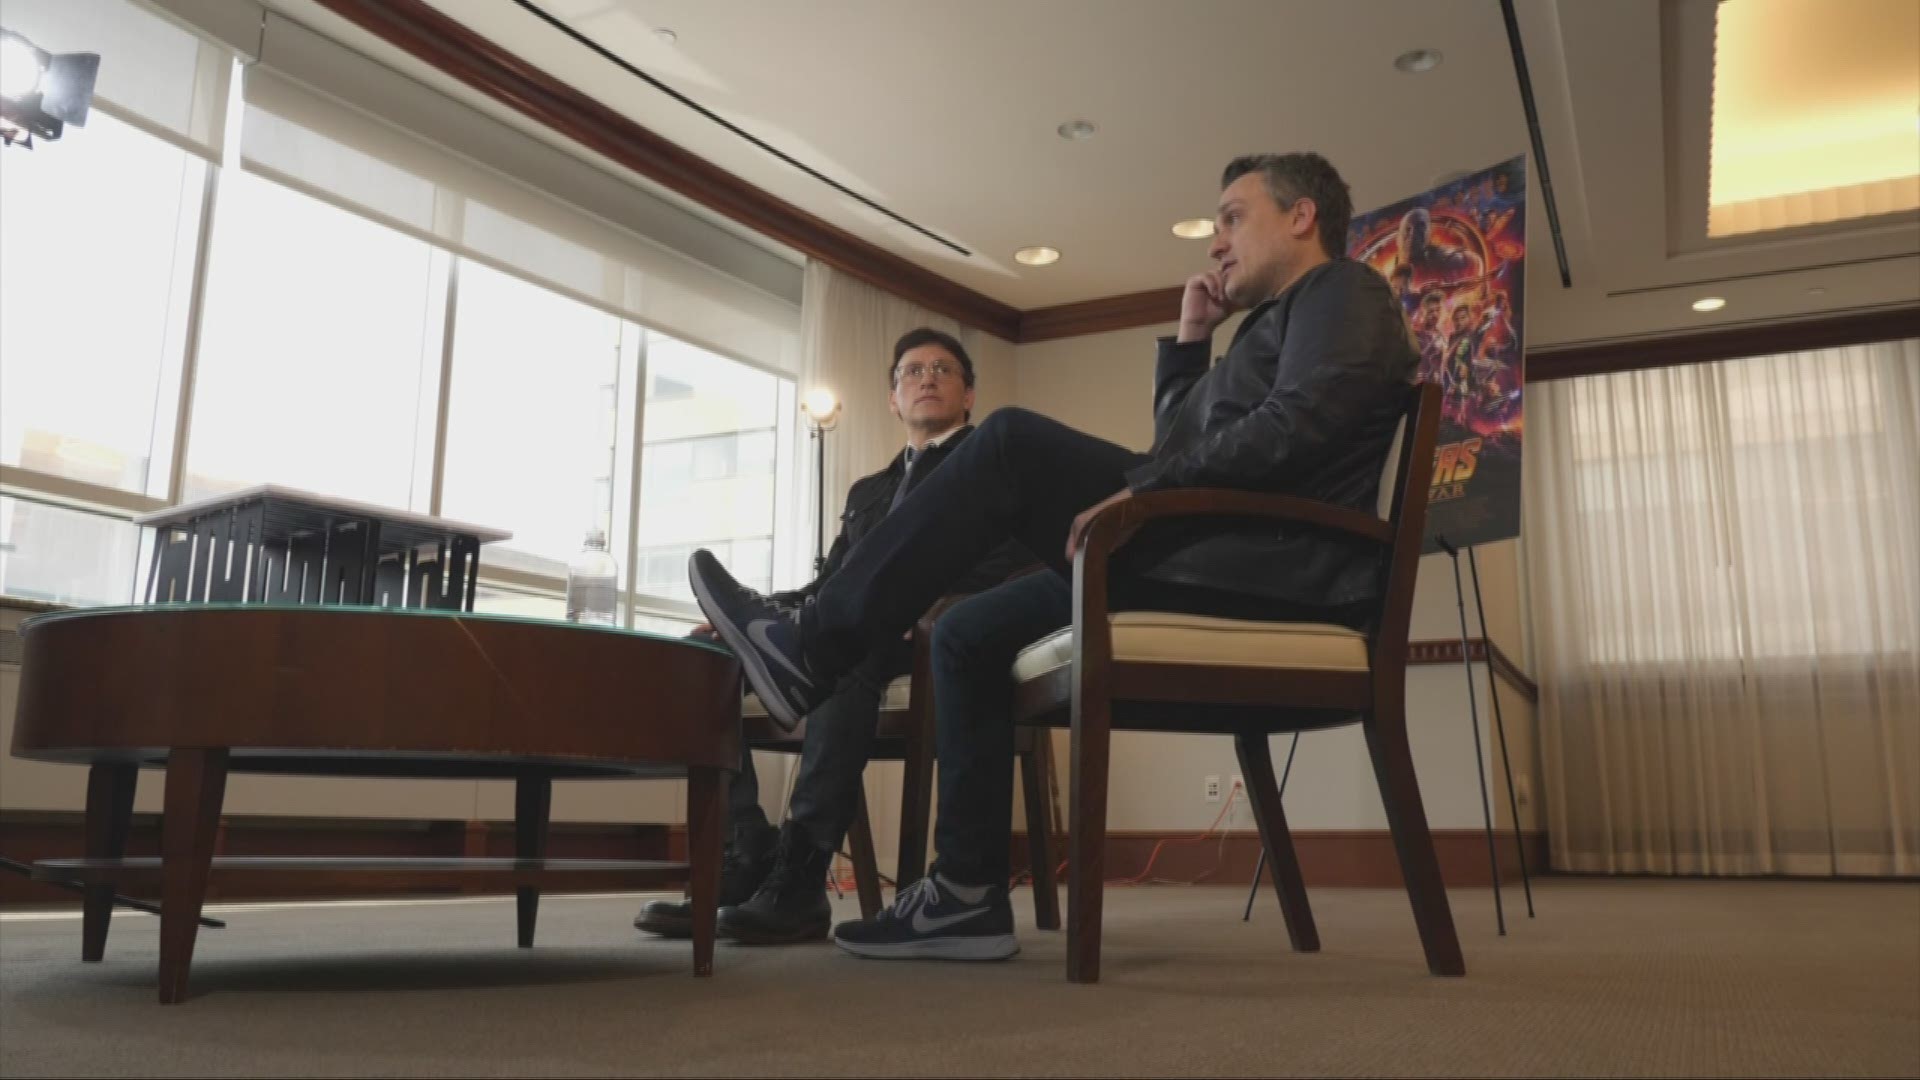 Cleveland natives, Russo Brothers sat down with WKYC and talked about their popular movies